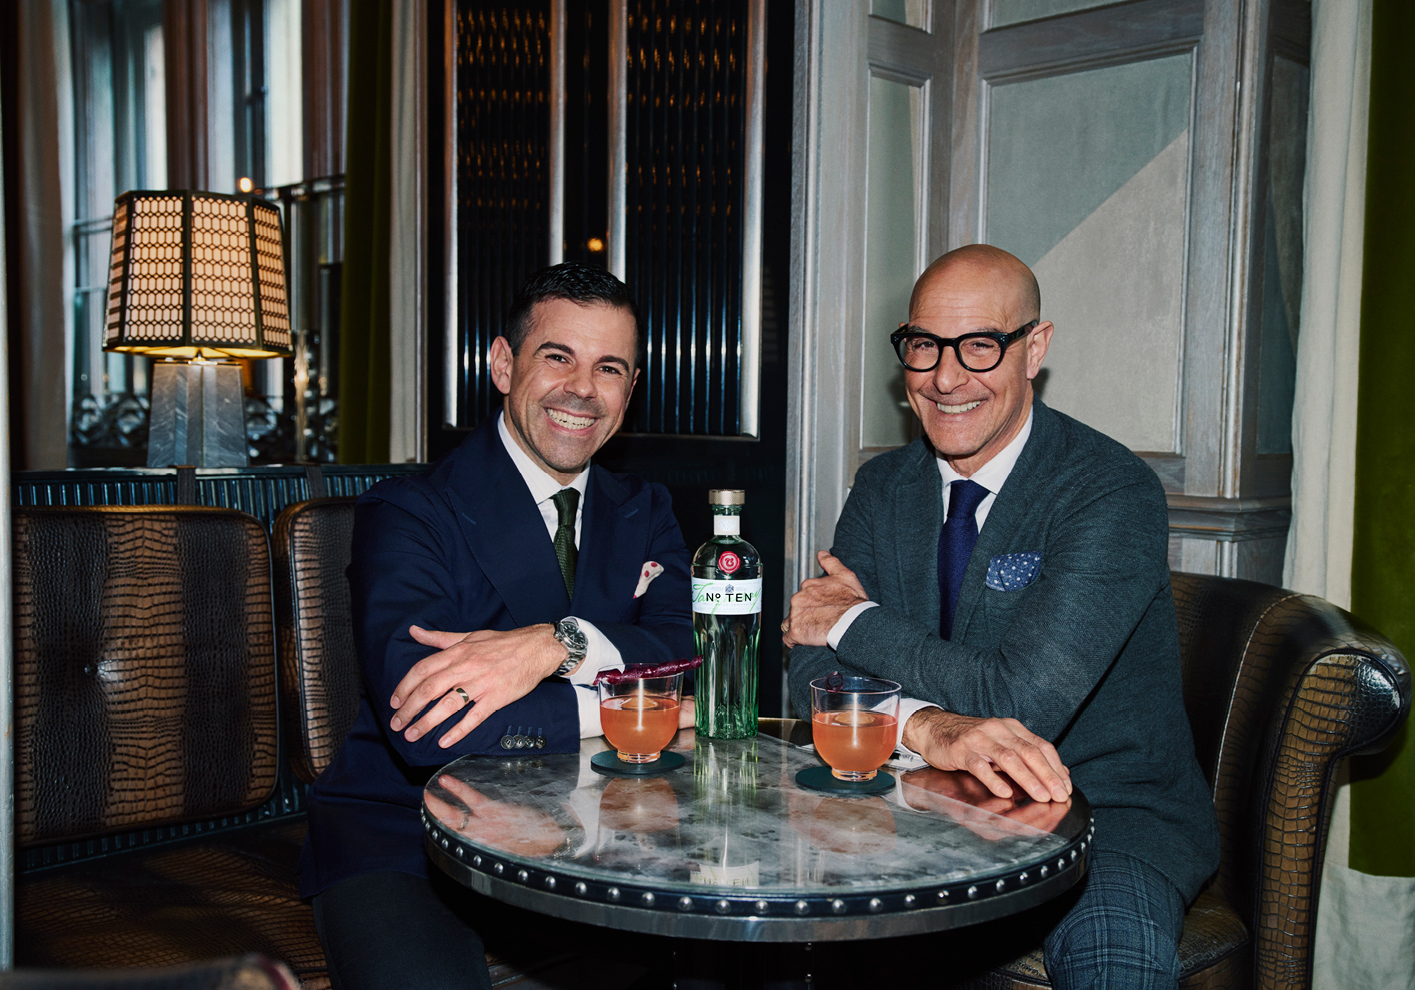 Agostino "Ago" Perrone of the Connaught Bar (left) and Stanley Tucci enjoy the Tenacious cocktail, made using Tanqueray No. 10